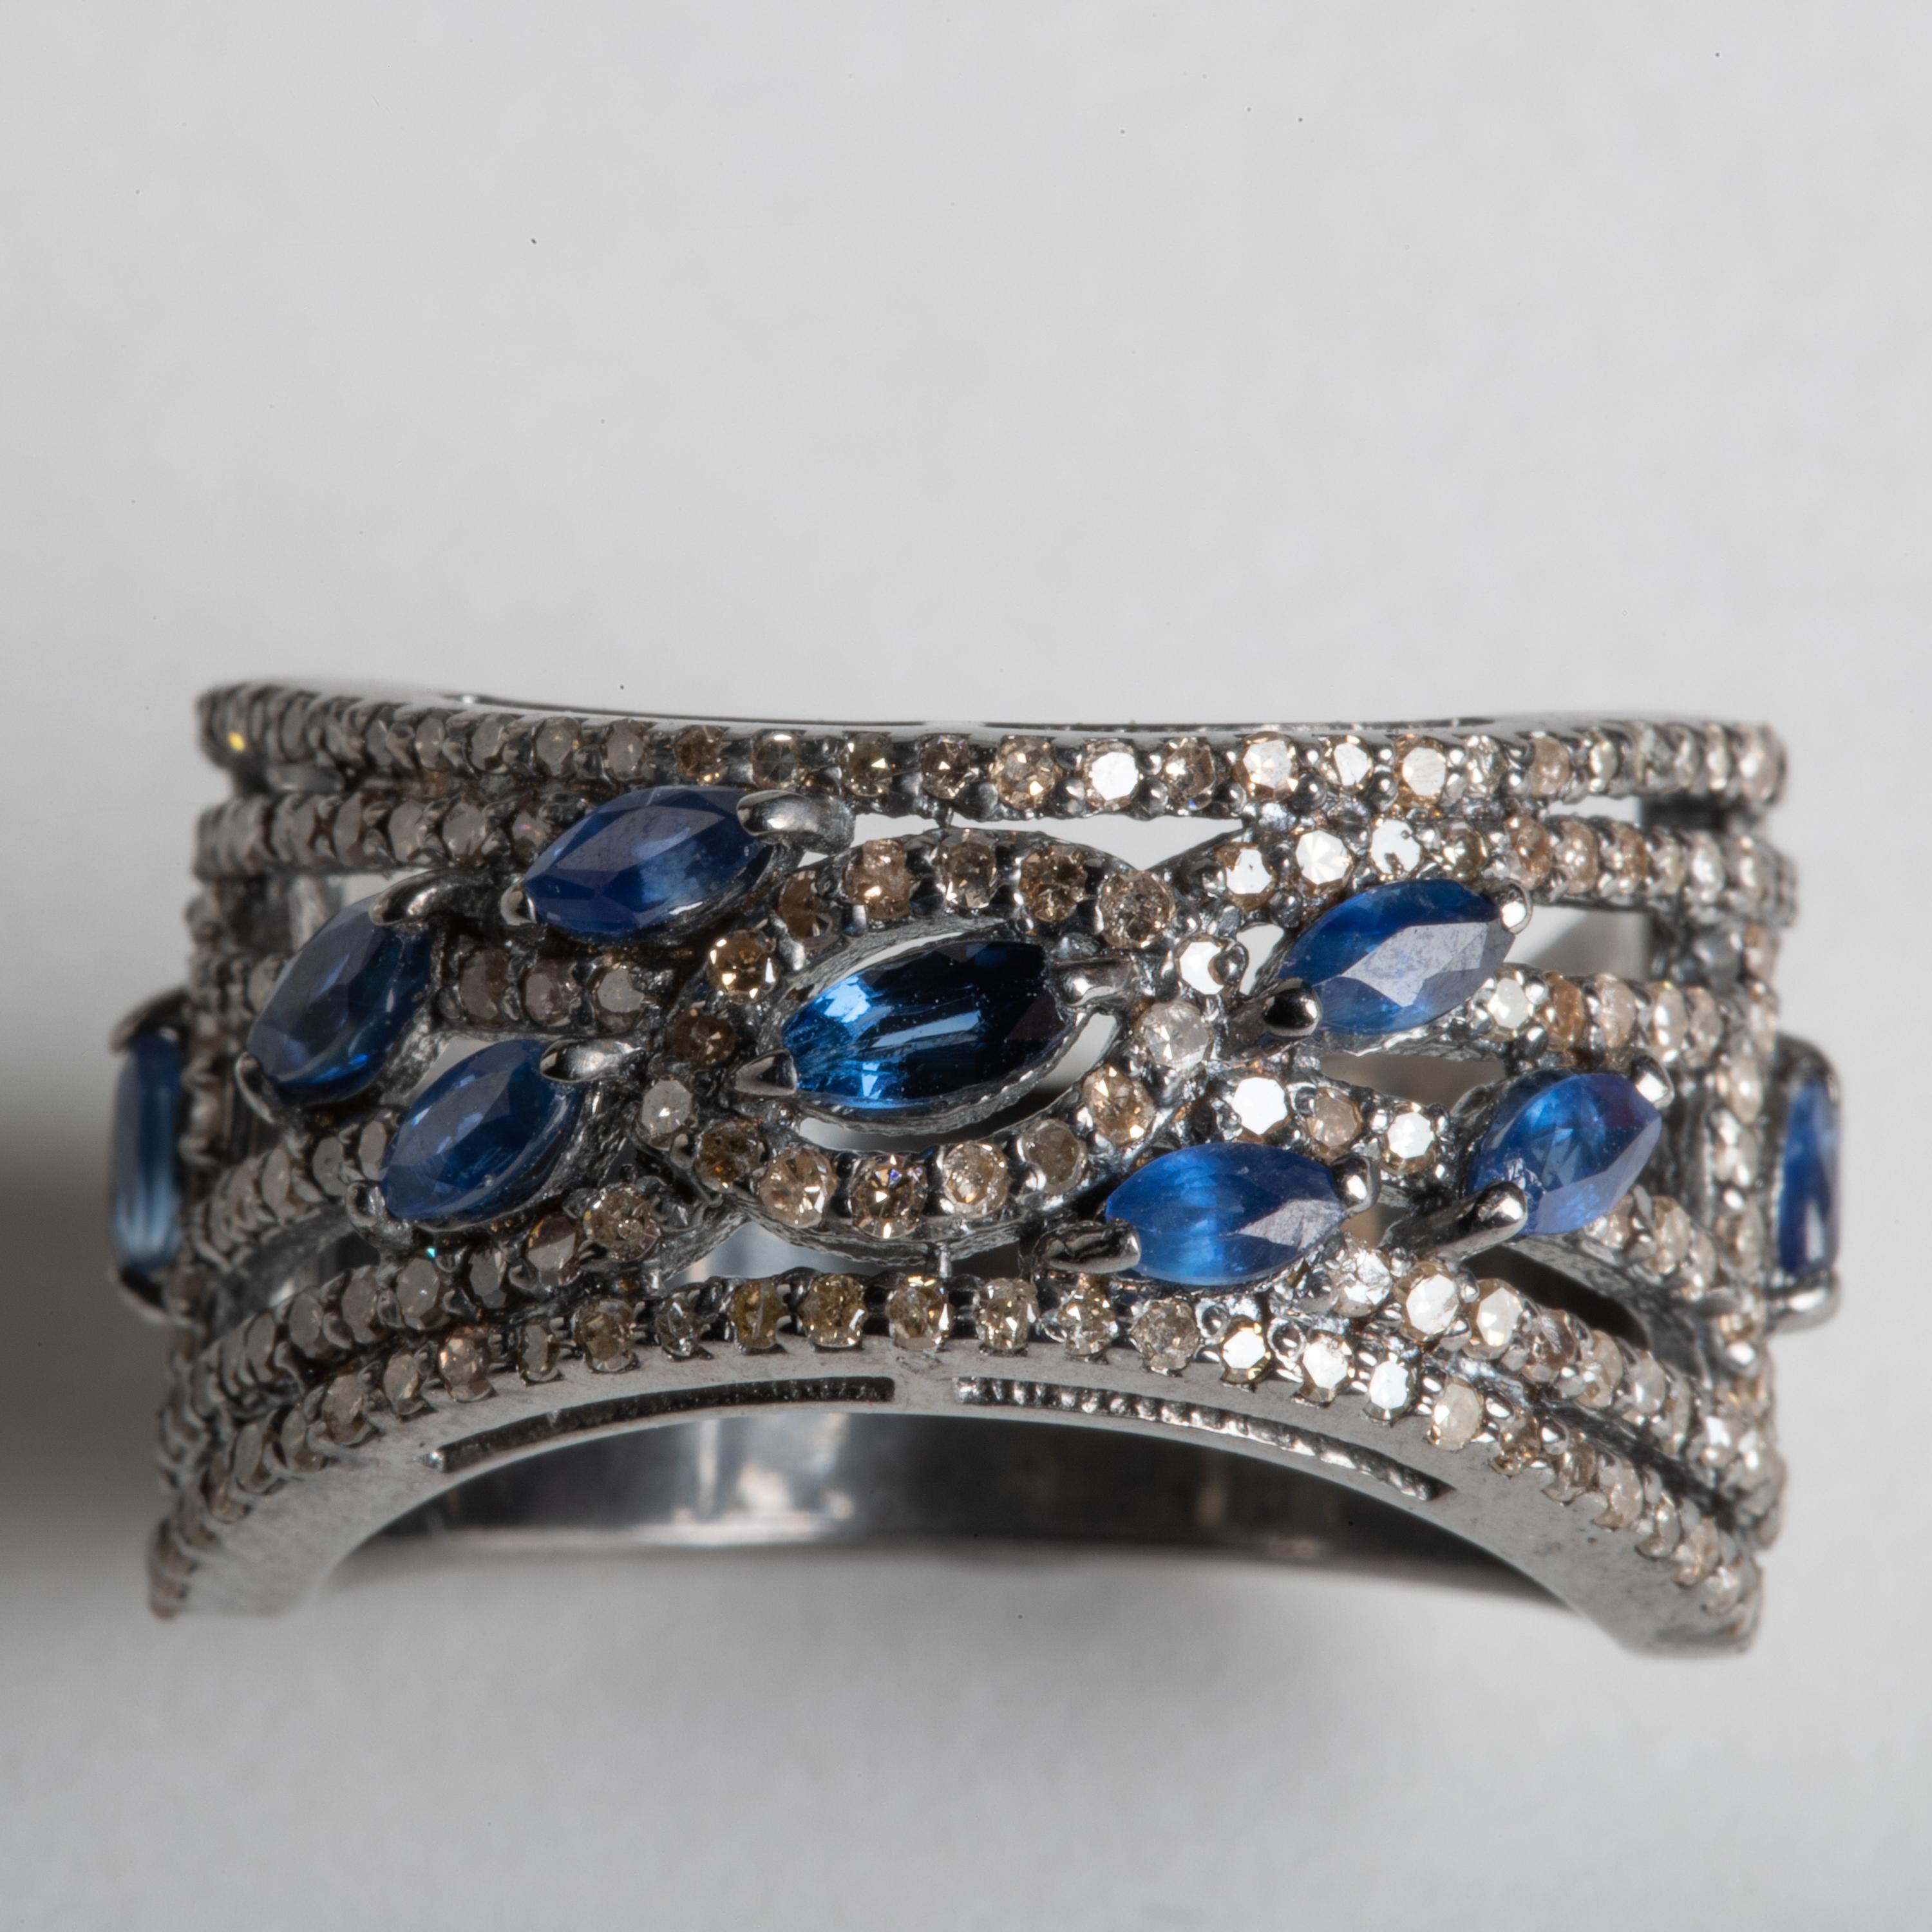 9 marquise cut blue sapphires set among round, brilliant cut, pave`-set diamonds.  In an oxidized sterling silver.  Carat weight of sapphires total 1 carat; diamonds are .99 carats.  Ring size is 8.

The fine jewelry collection is sourced, designed